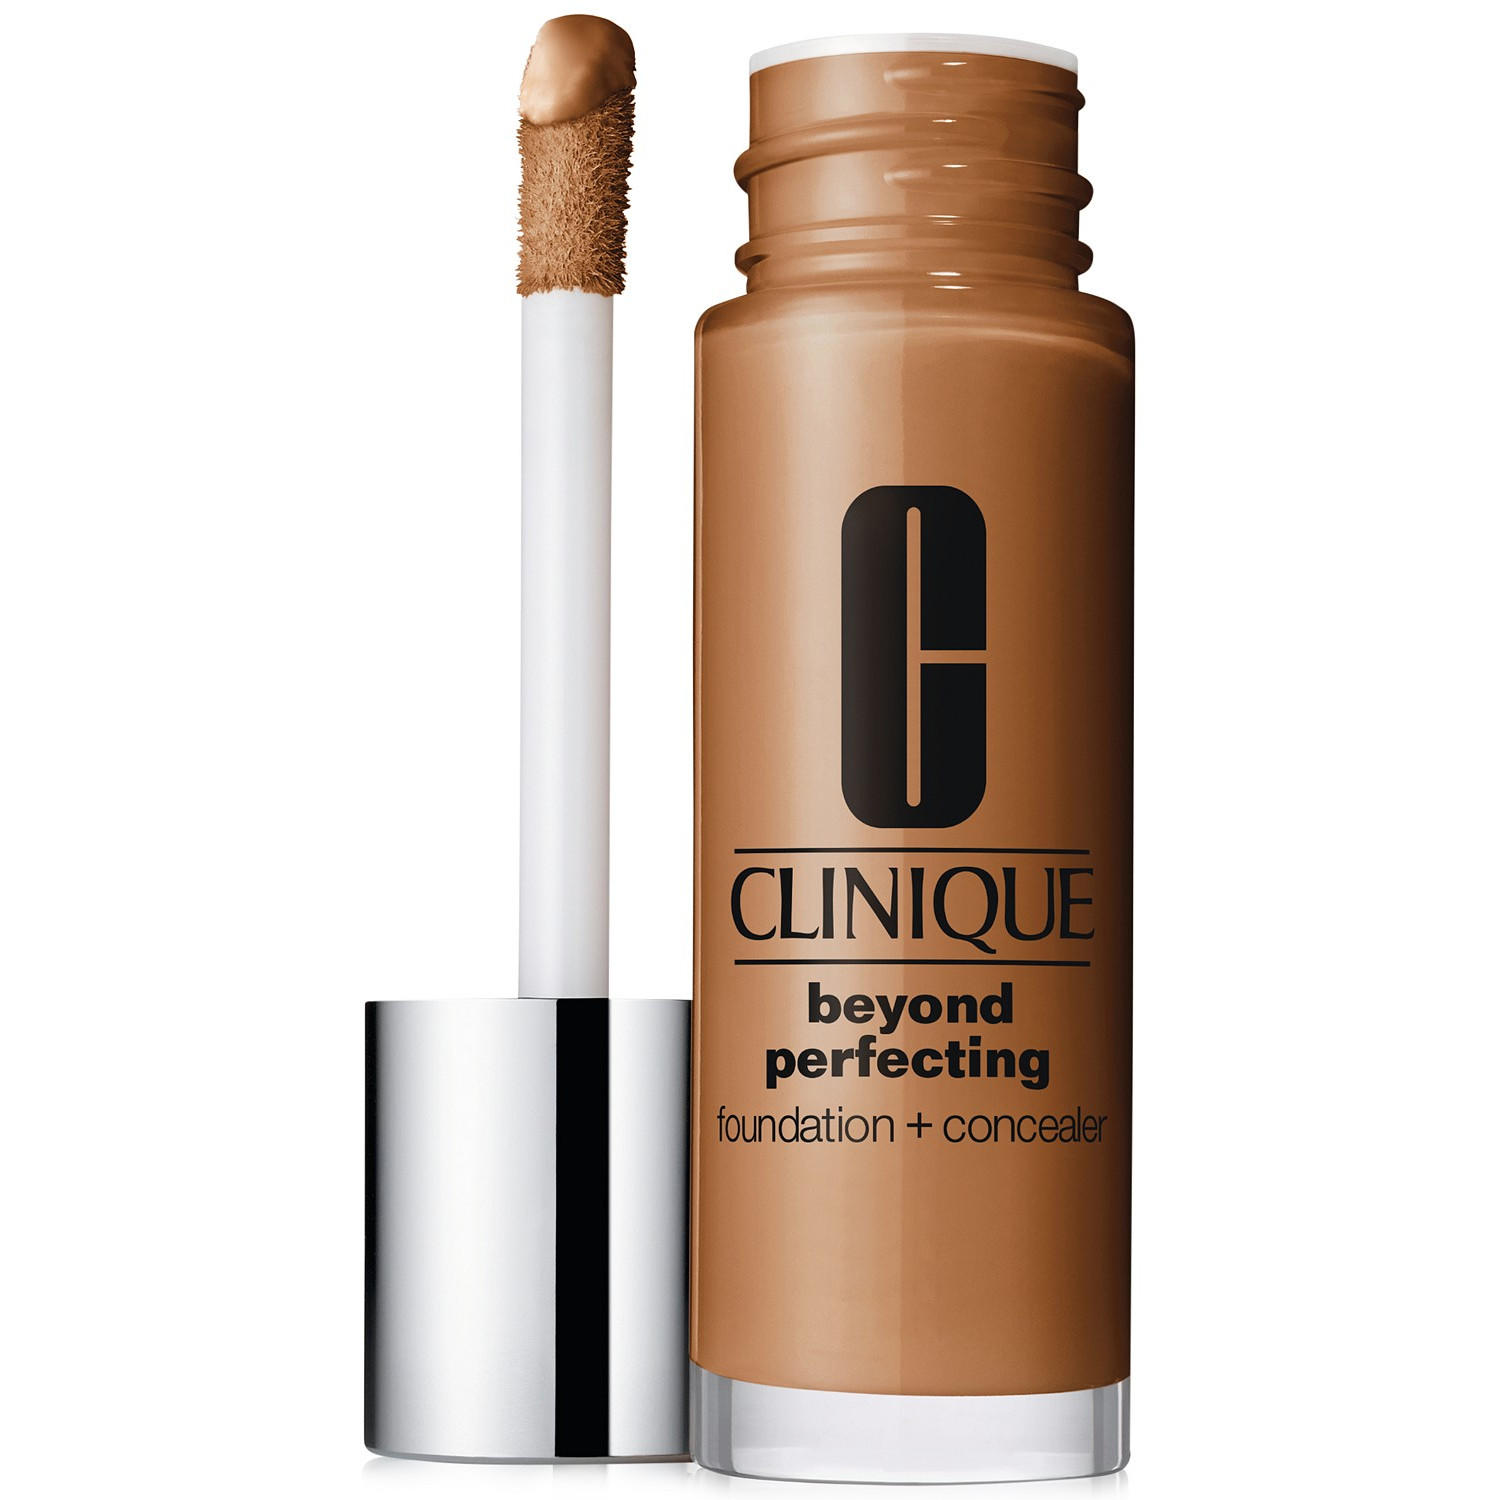 Clinique Beyond Perfecting Foundation + Concealer Golden 24